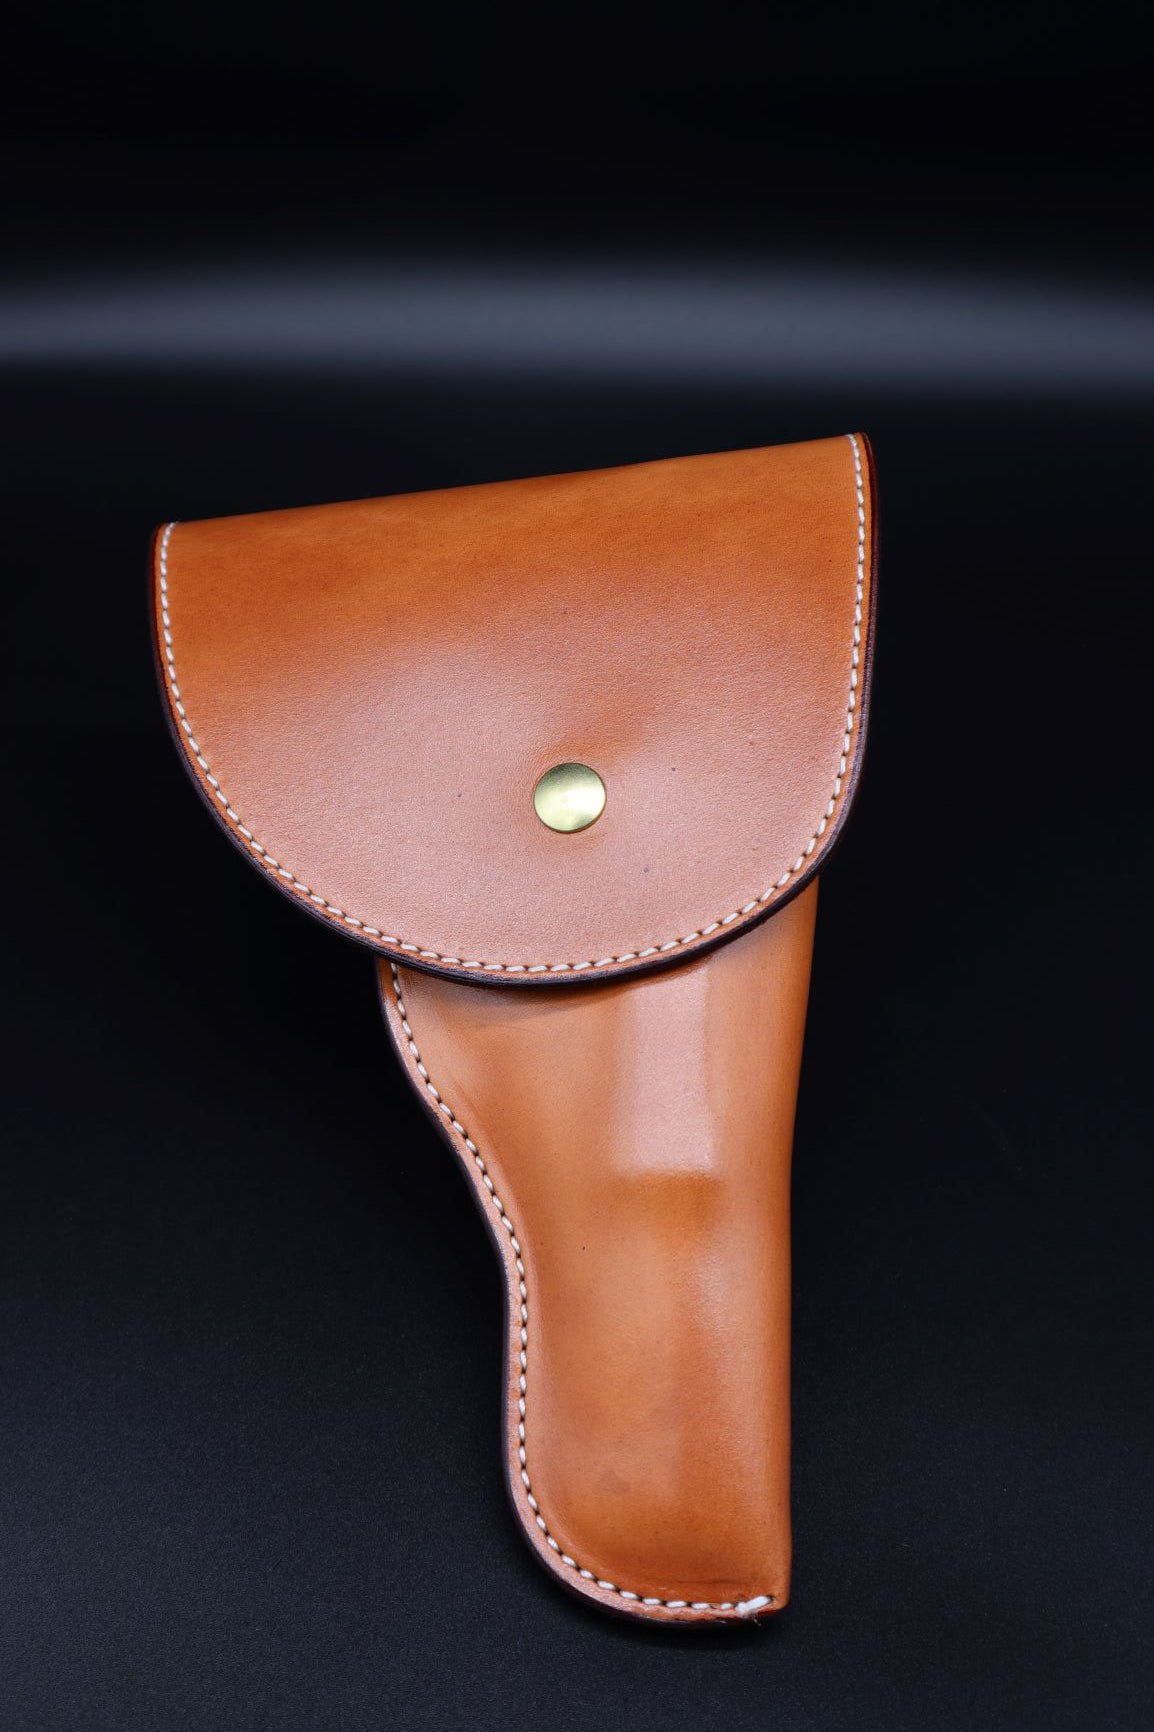 114 Field Holster with Full Flap and Closed End